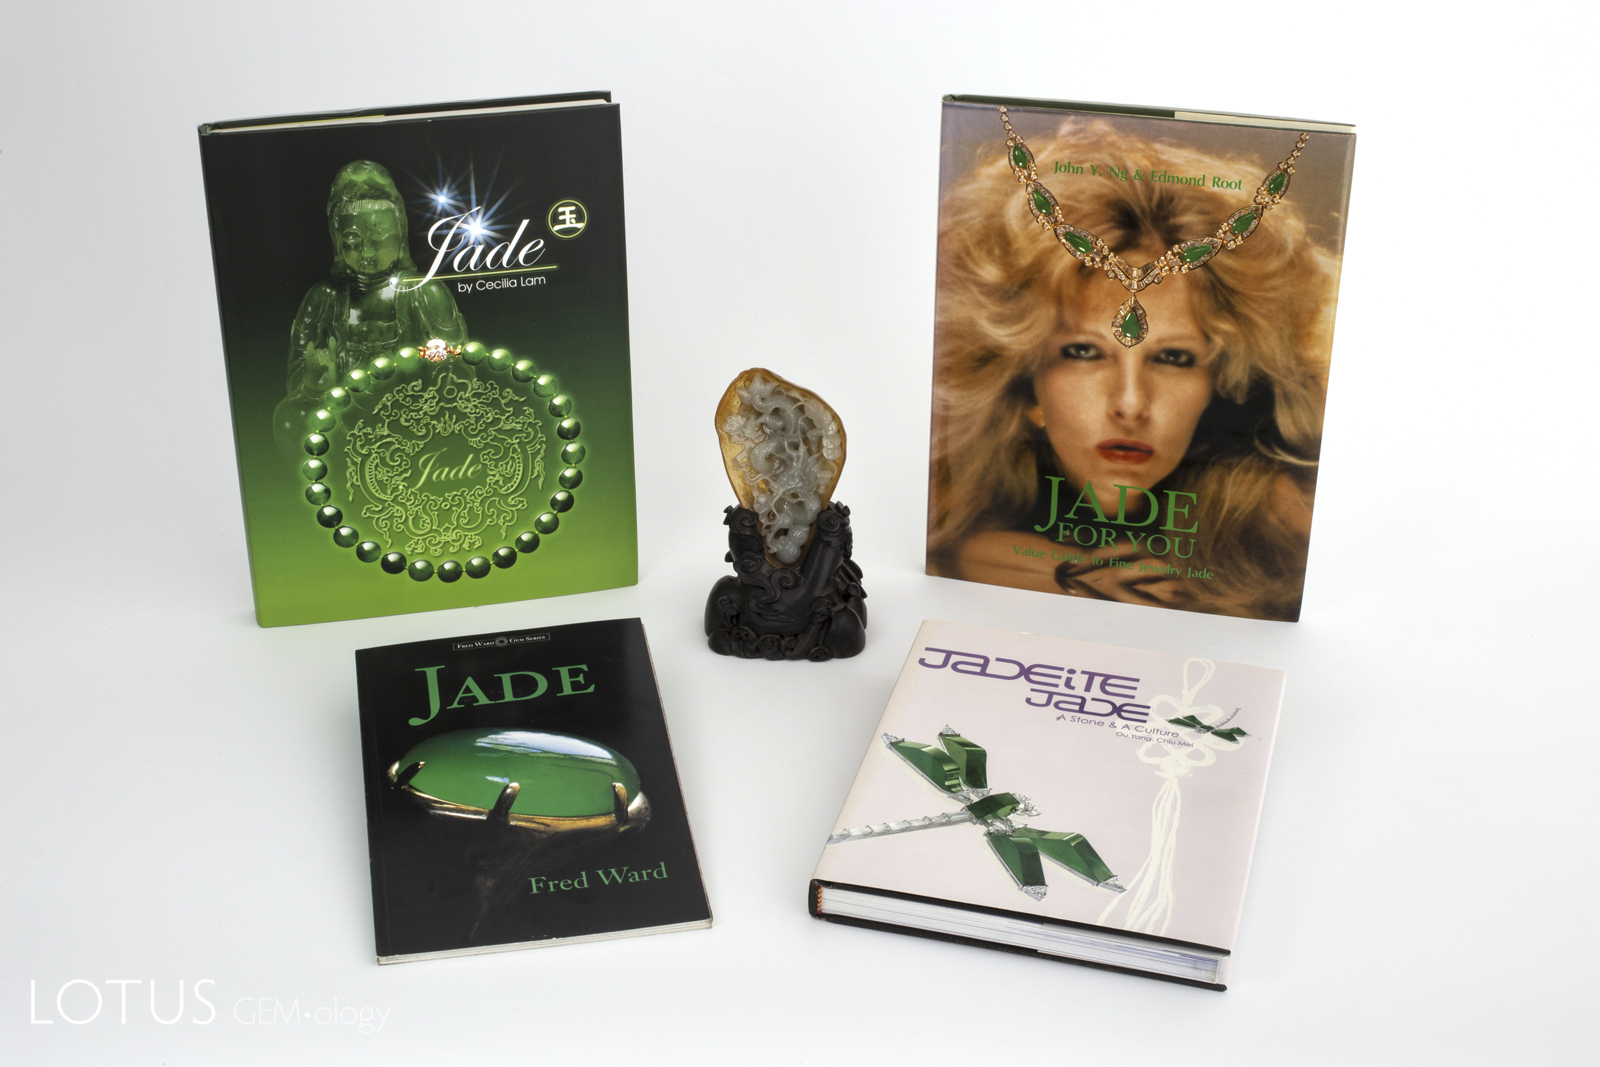 Four classic modern books on jade surround a Chinese carving in Burmese jade. Clockwise from top left: Jade by Cecilia Lam; Jade for You by John Ng & Edmond Root; Jade by Fred Ward, and Jadeite Jade: A Stone & a Culture by Ou Yang Chiu Mei.